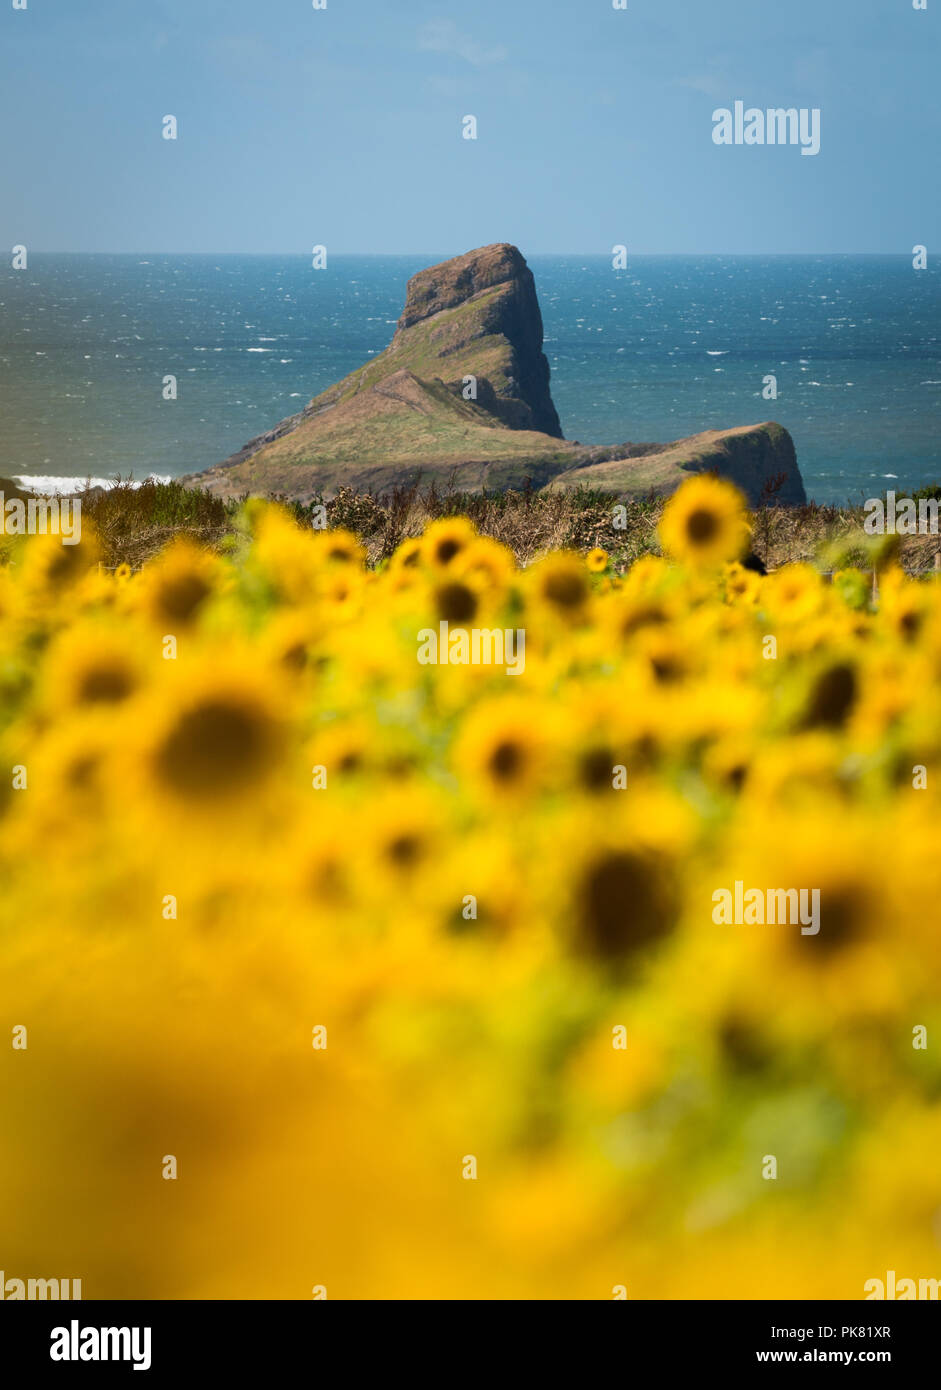 Sunflowers growing on the Gower peninsular by Rhossili Bay over looking Worms Head, Gower, Wales, UK Stock Photo